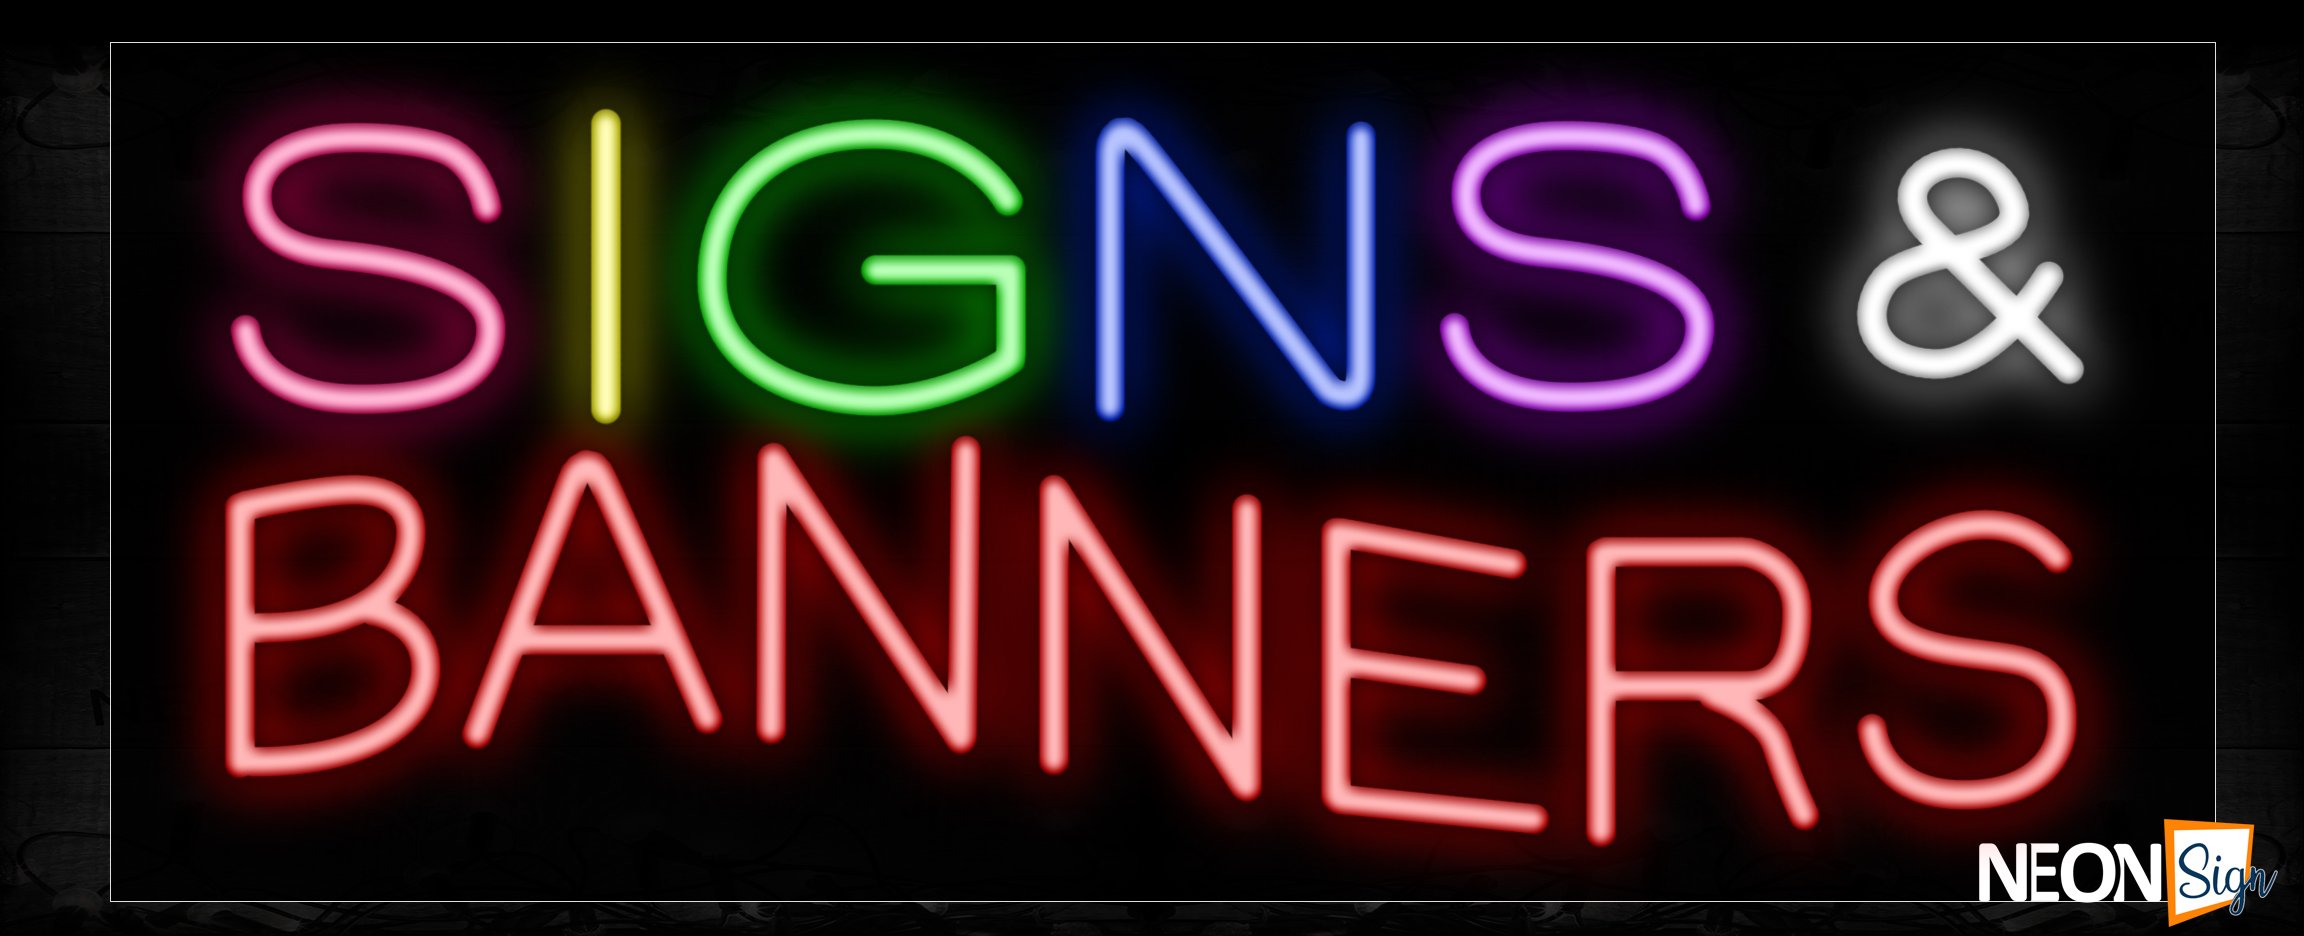 Image of 10898 signs & banner with border led bulb sign_13x32 Black Backing